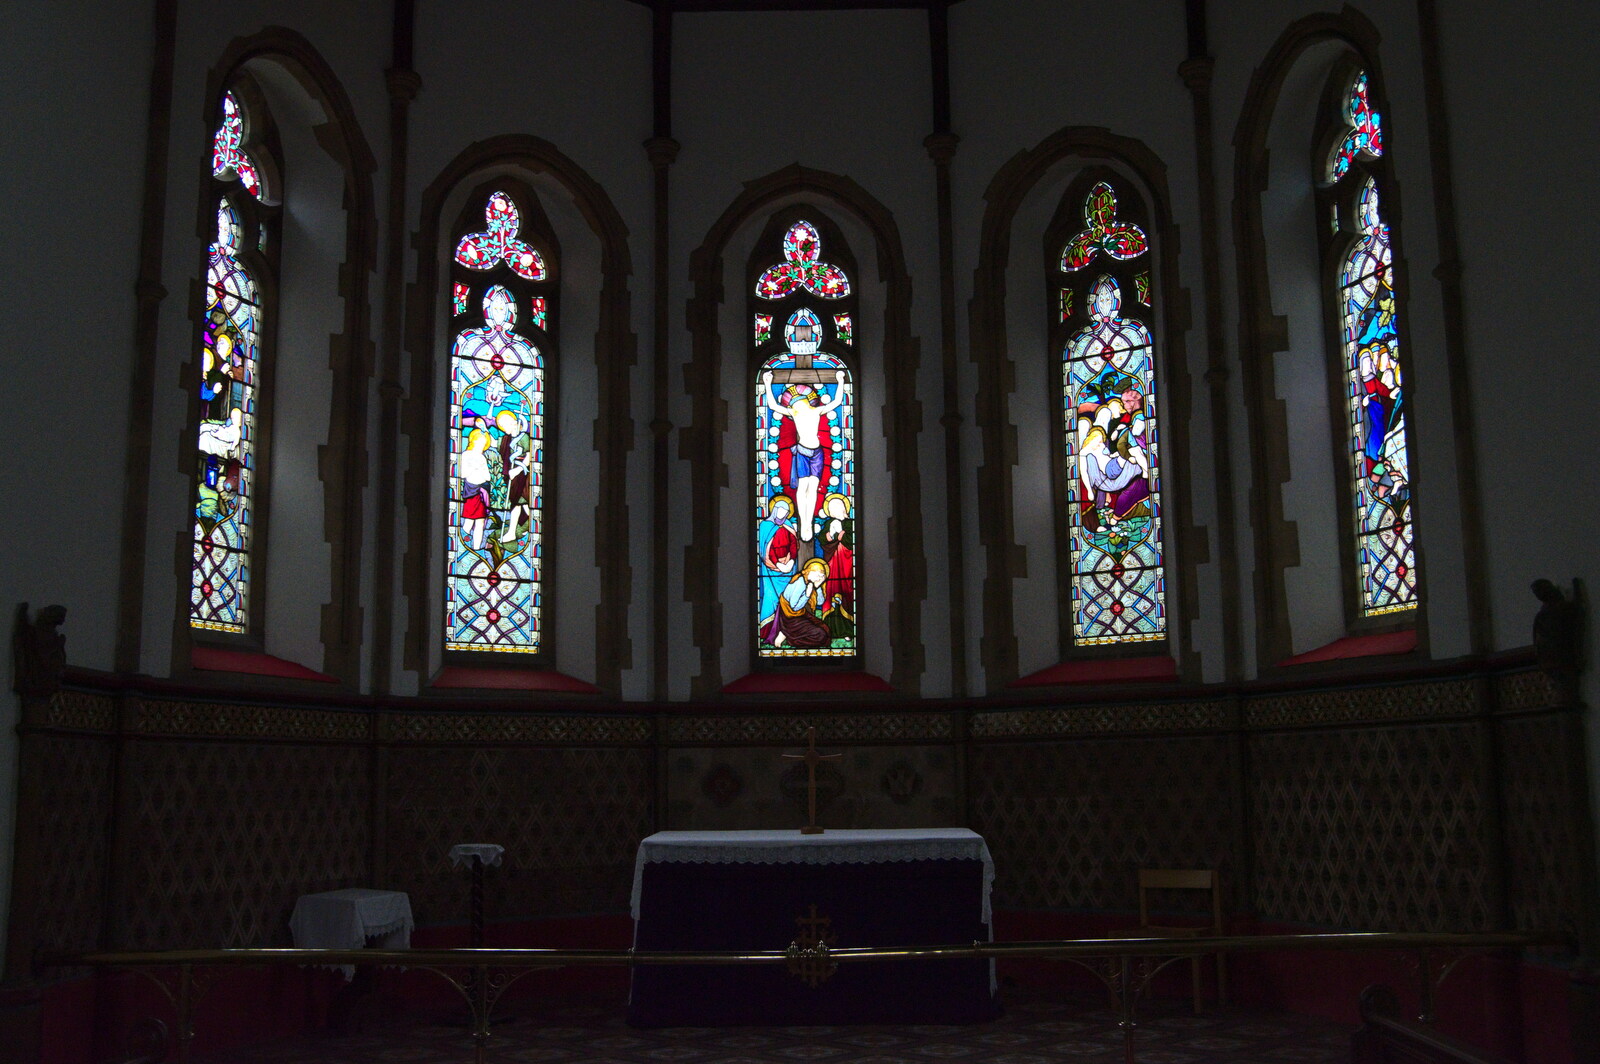 Lunch in Harleston, Norfolk - 1st March 2023: For a small chapel, there's a lot of nice glass